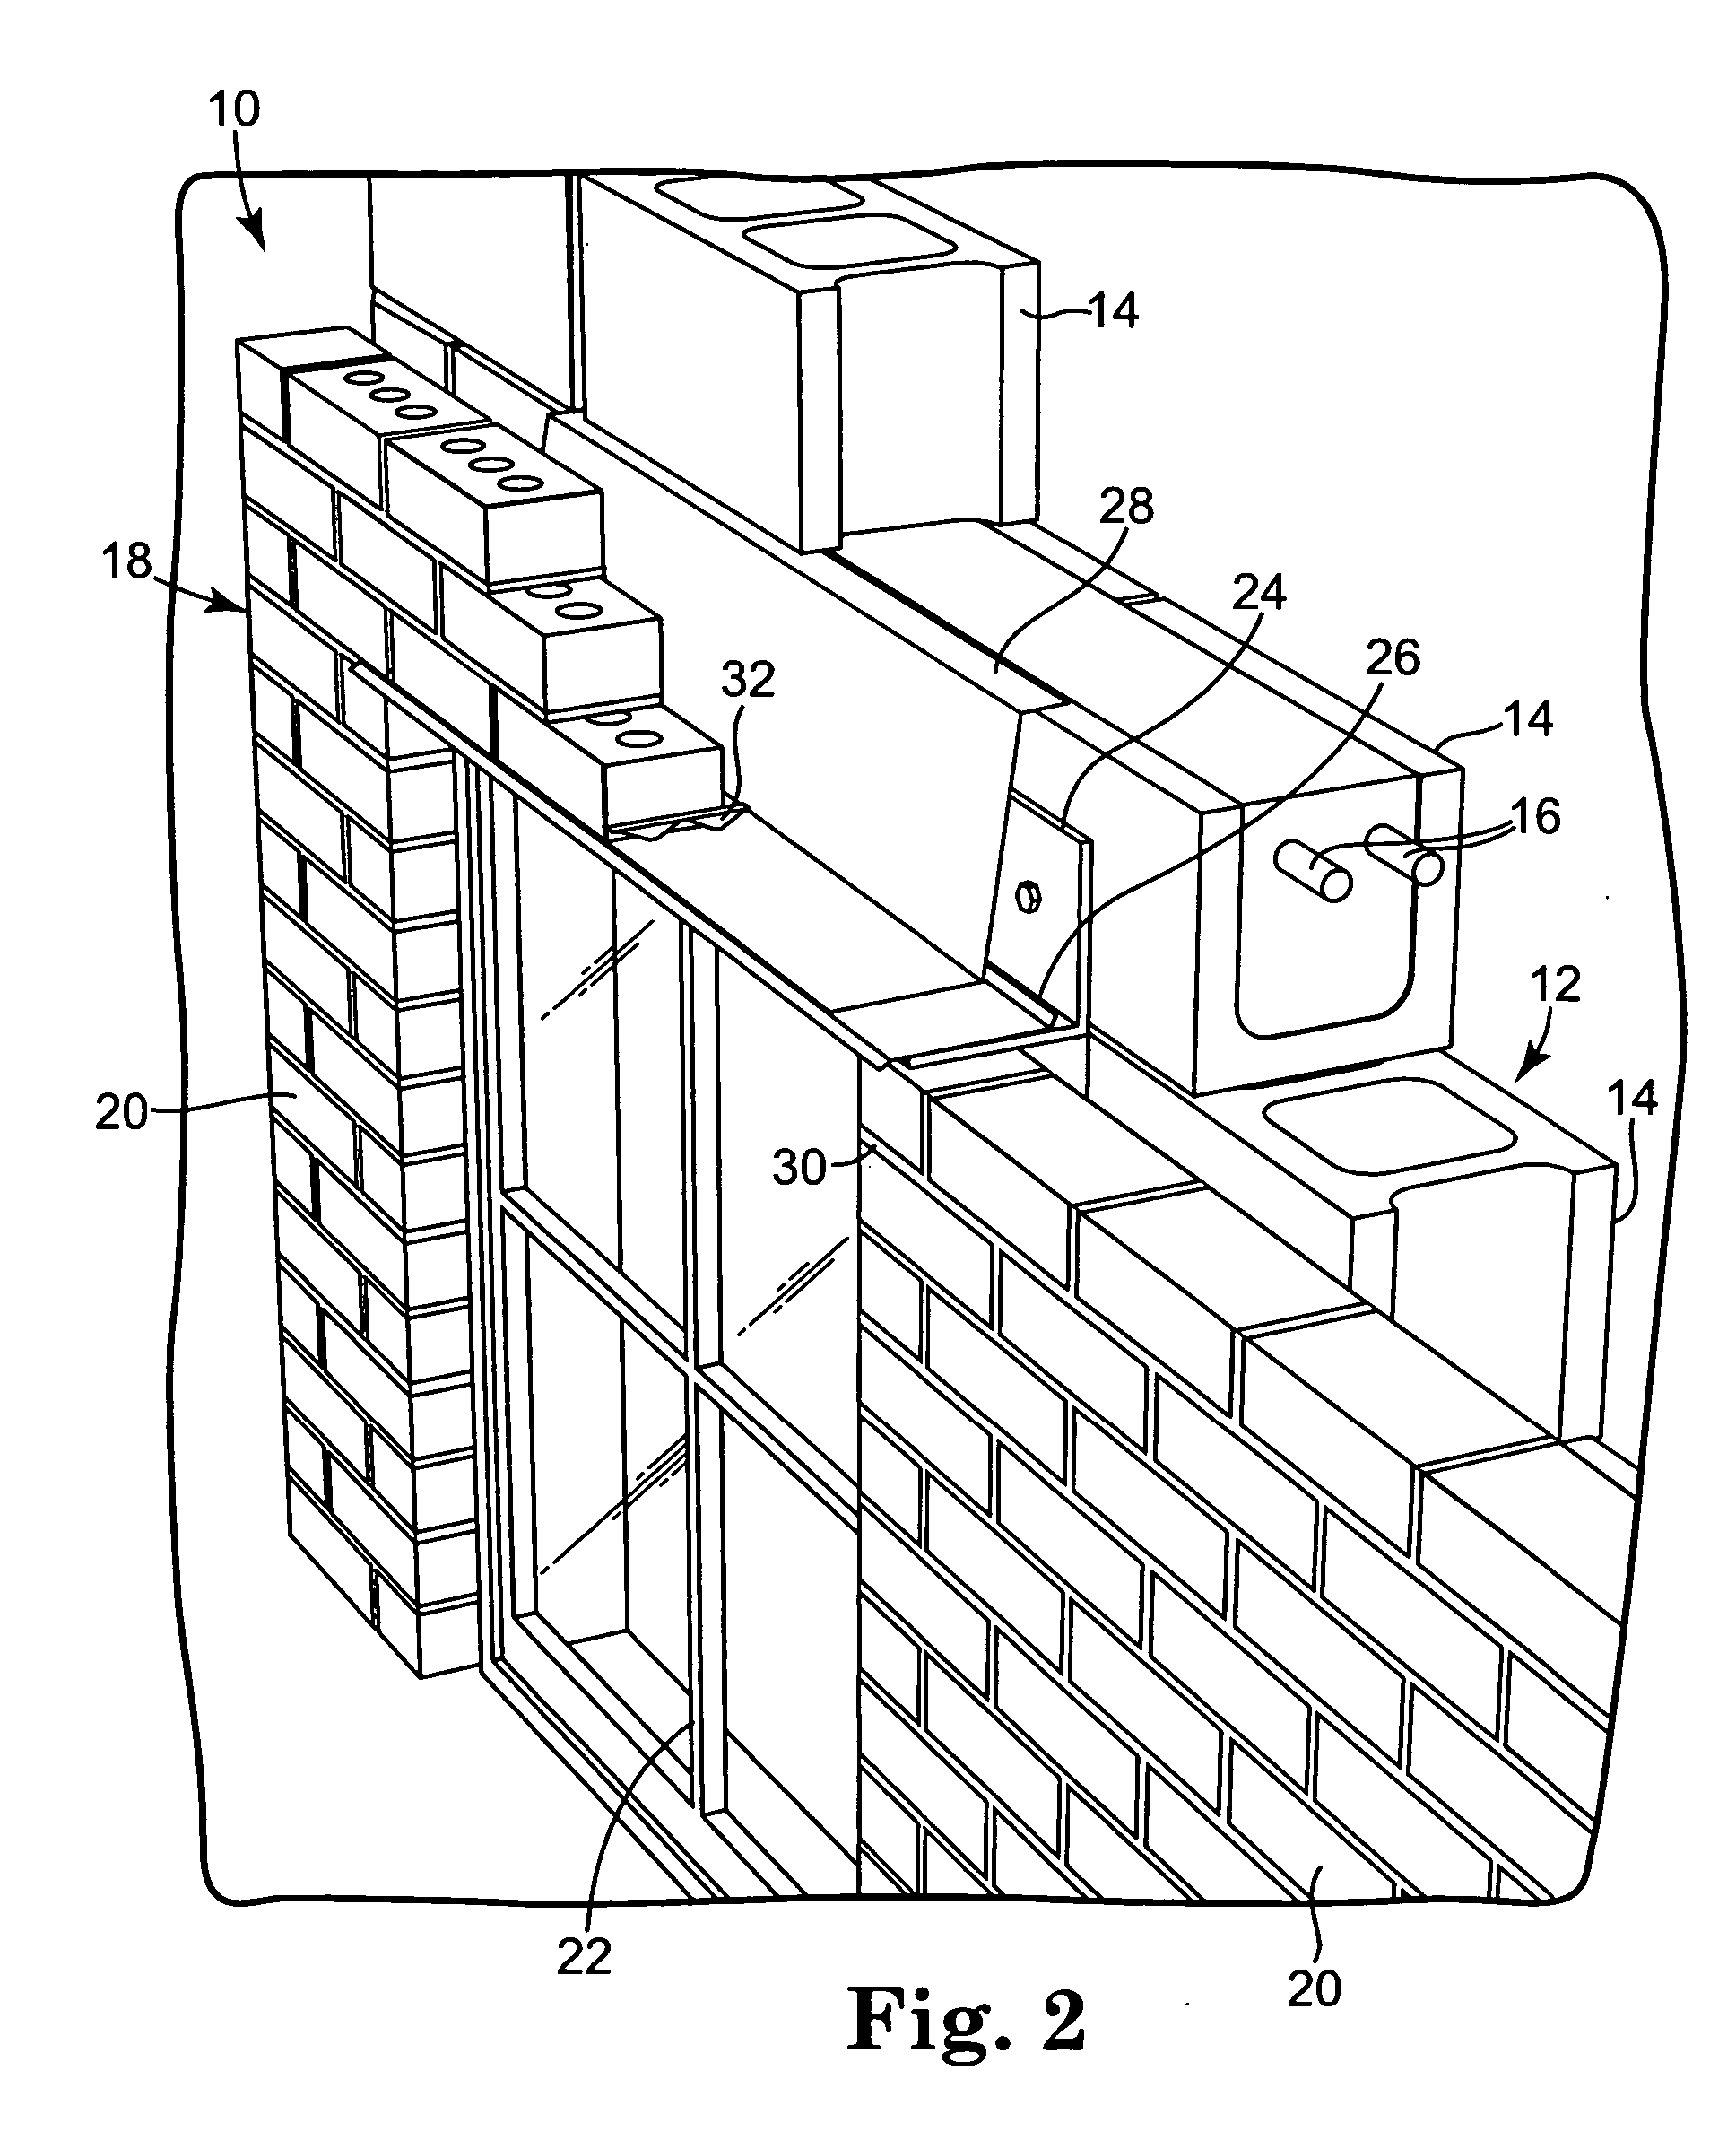 Head joint drainage device, wall system and method for draining moisture from a head joint